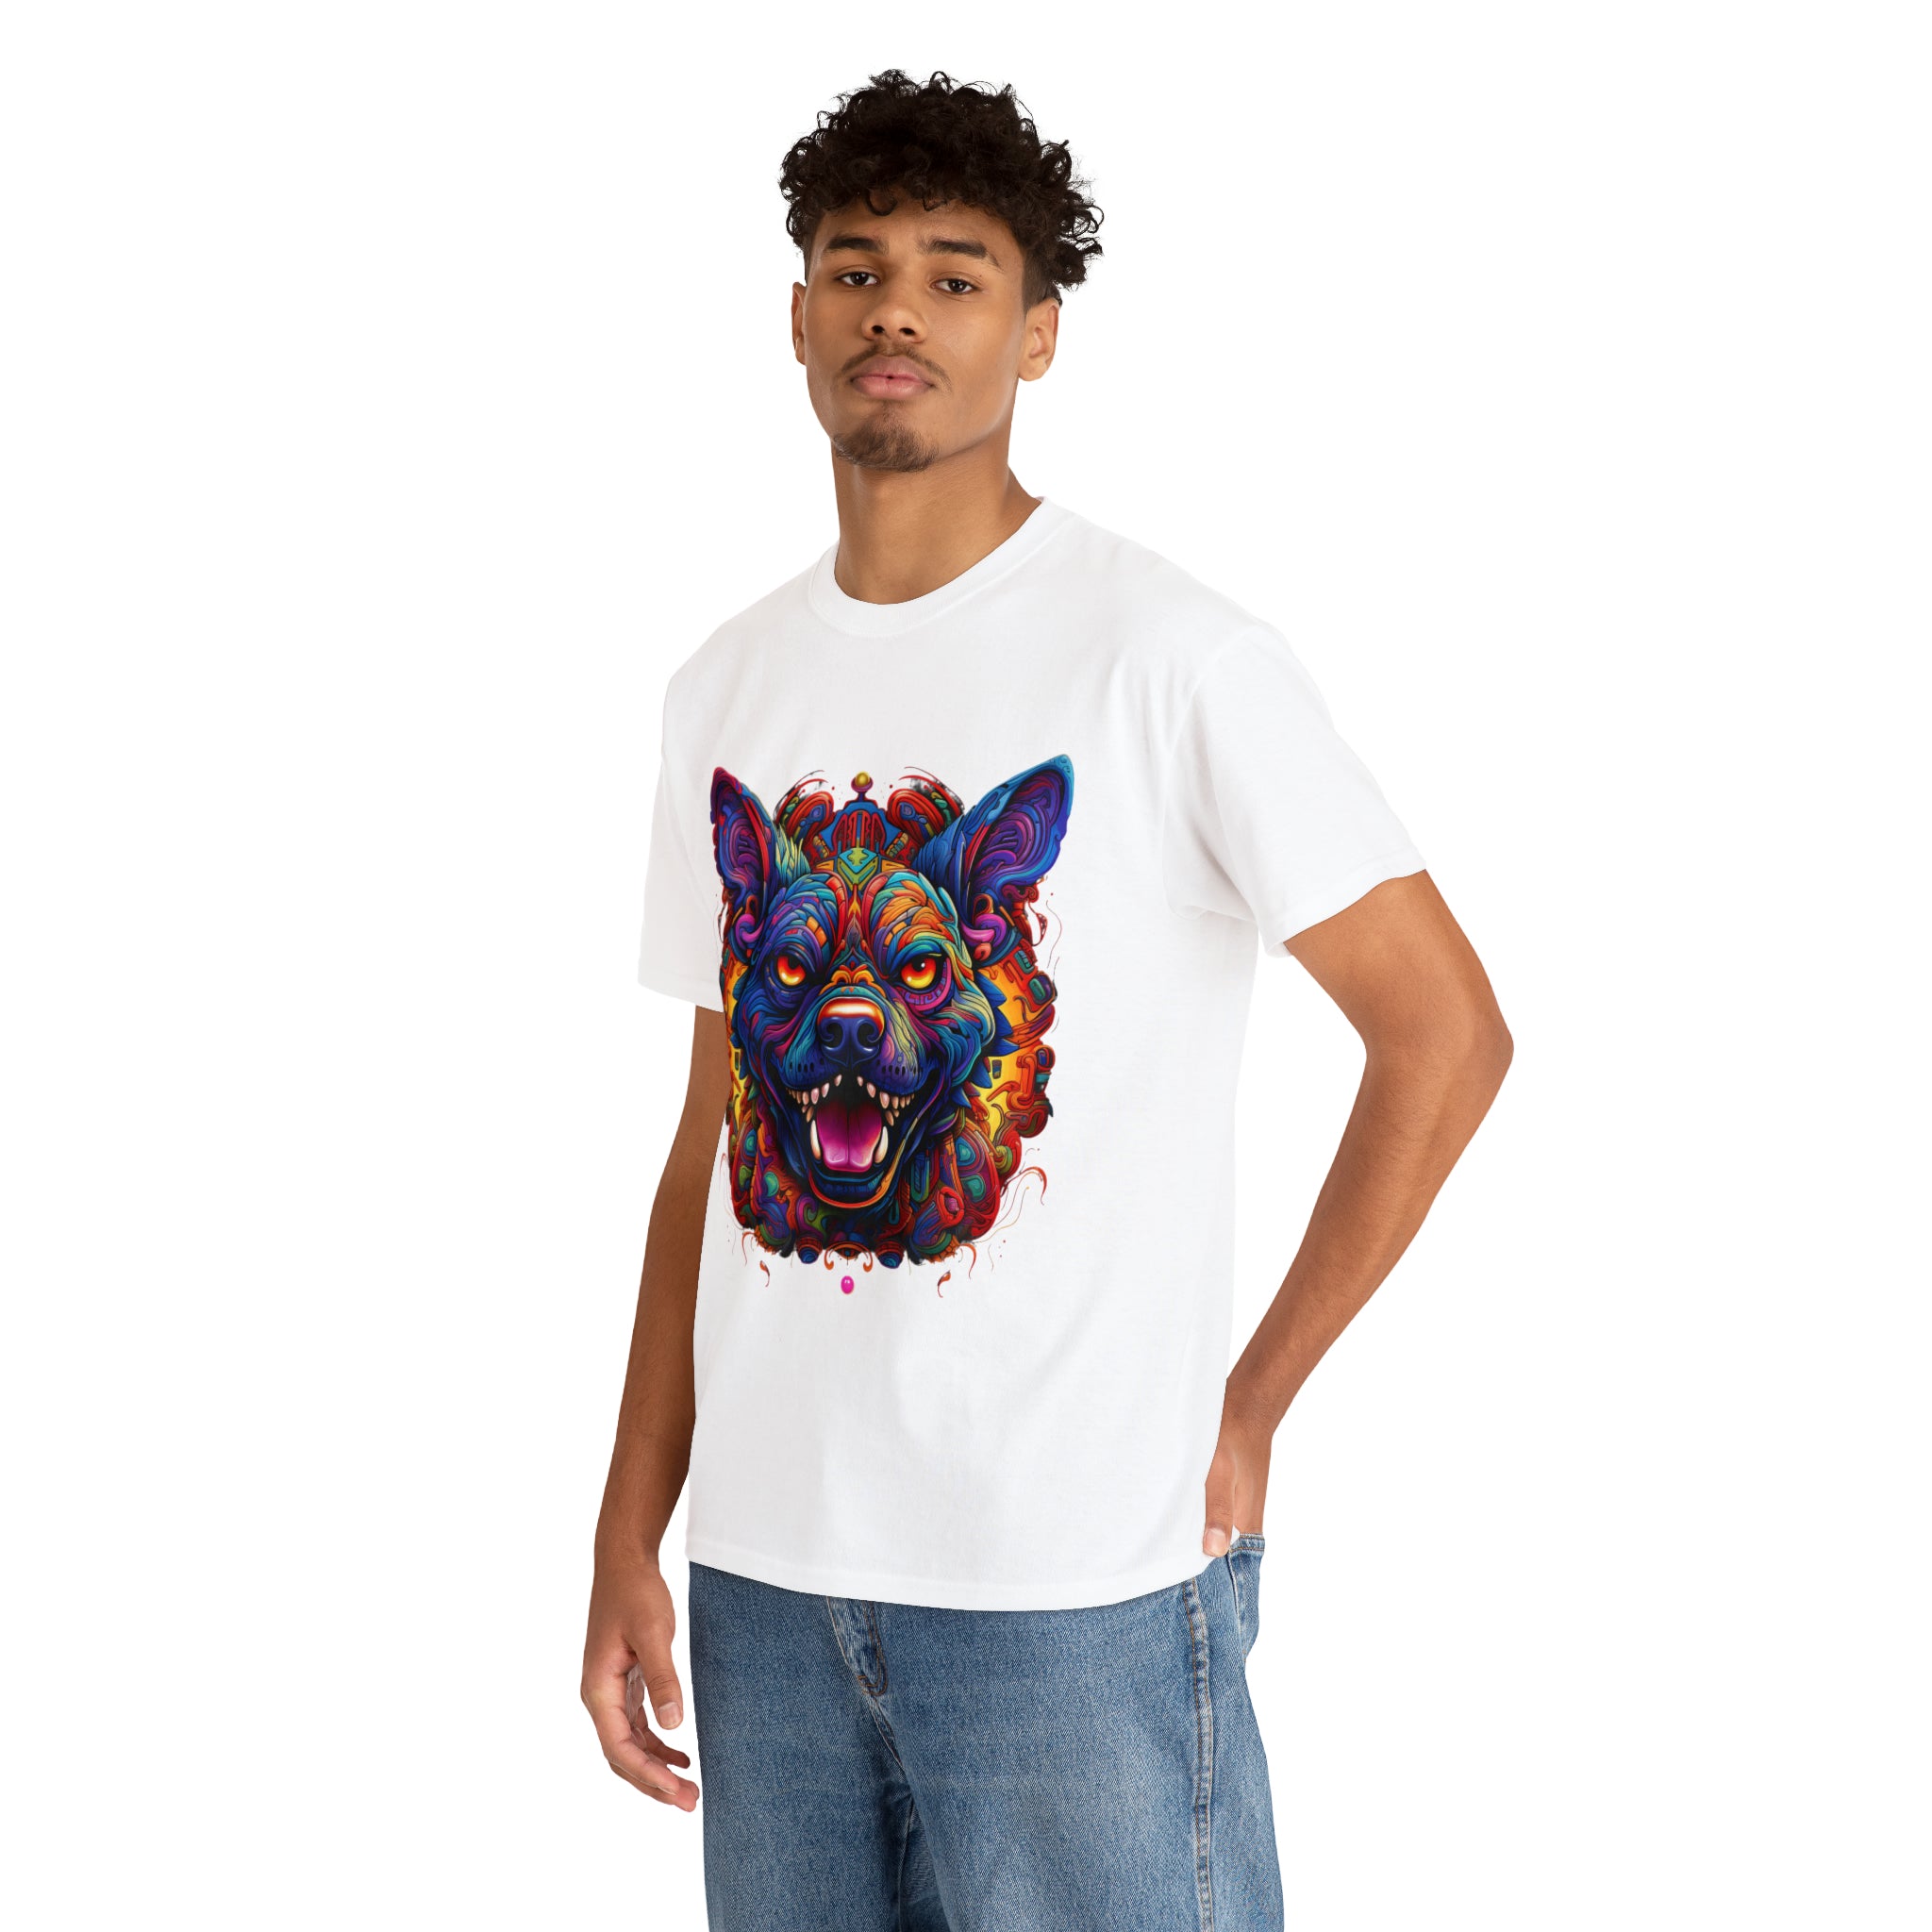 psychedelic dog psycho dog crazy classic  apparel t shirt